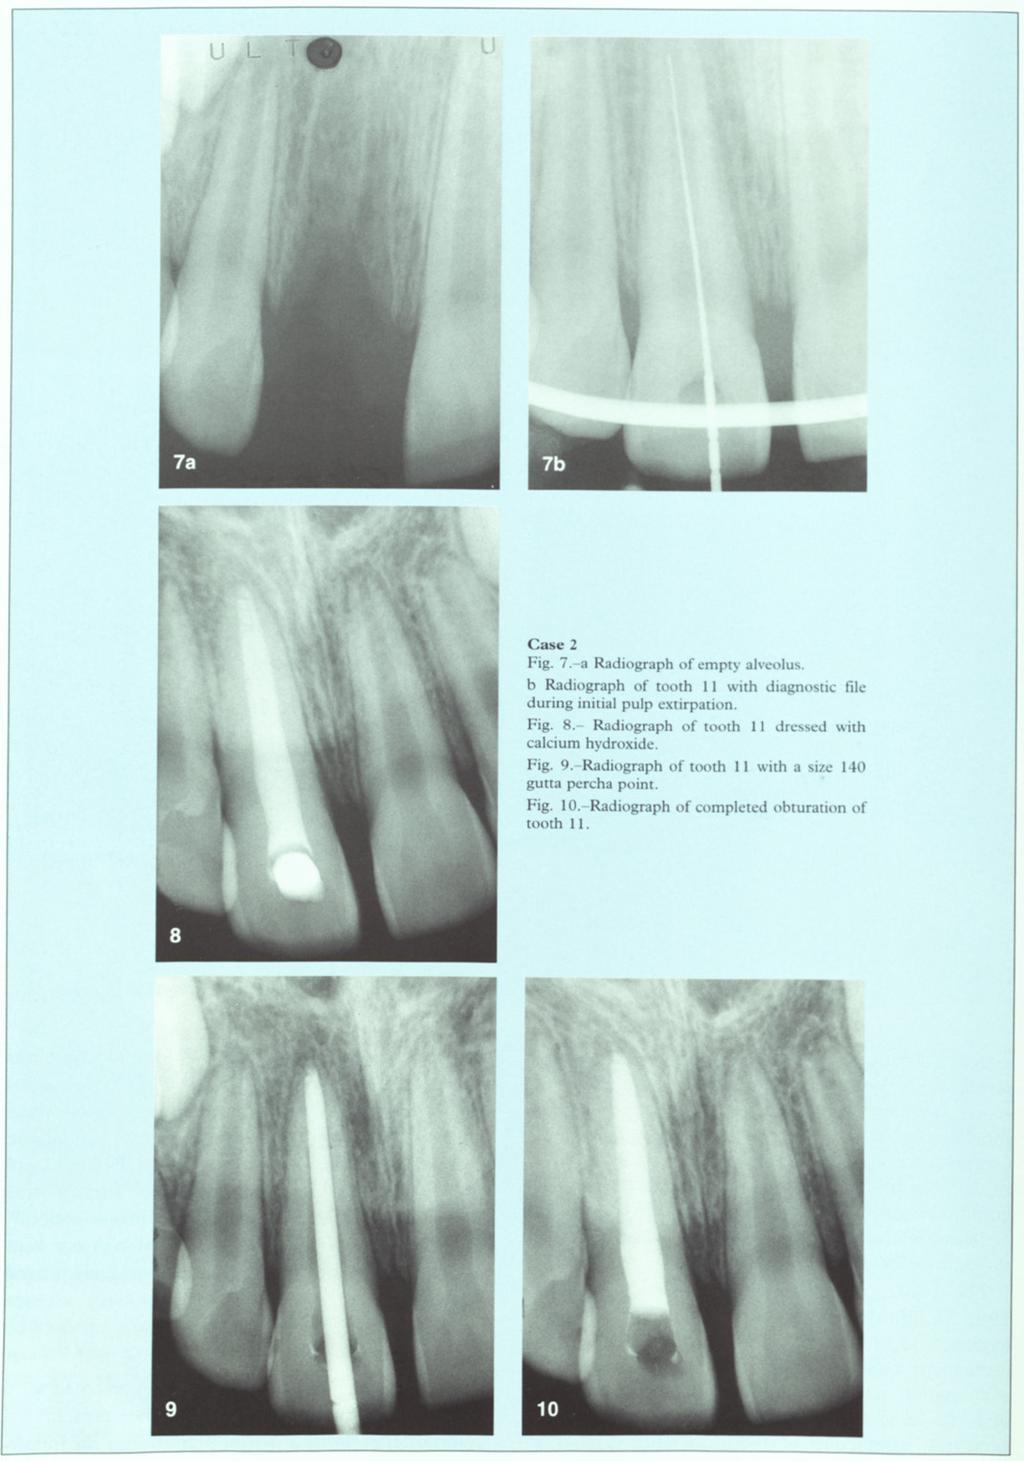 Case 2 Fig. 7.-a Radiograph of empty alveolus. b Radiograph of tooth 11 with diagnostic file during initial pulp extirpation. Fig. 8.